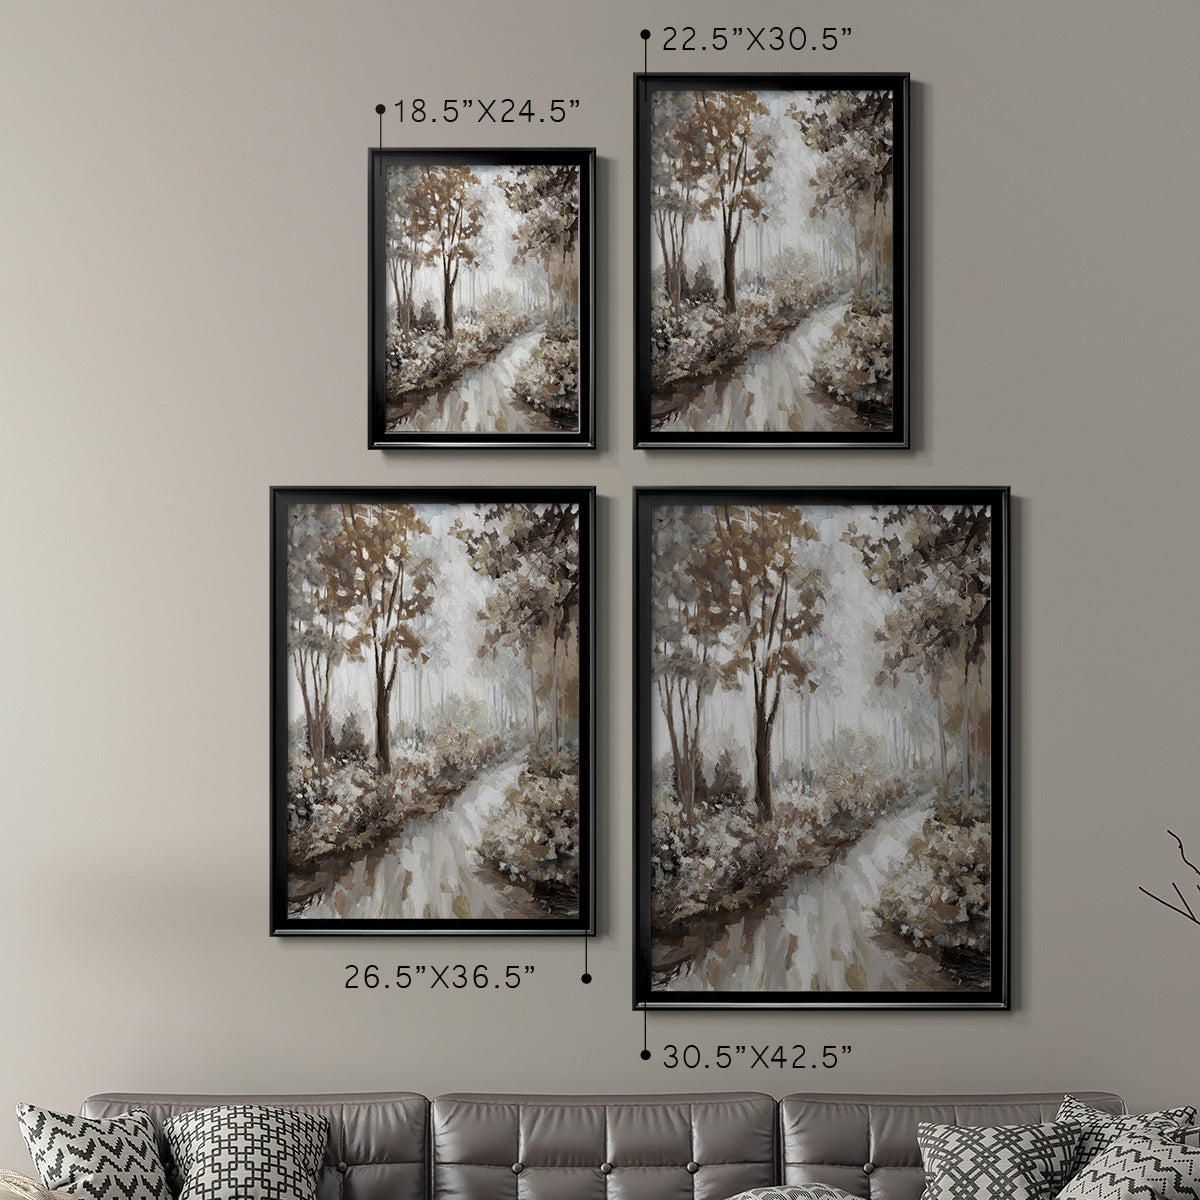 Into the Woods Premium Framed Print - Ready to Hang